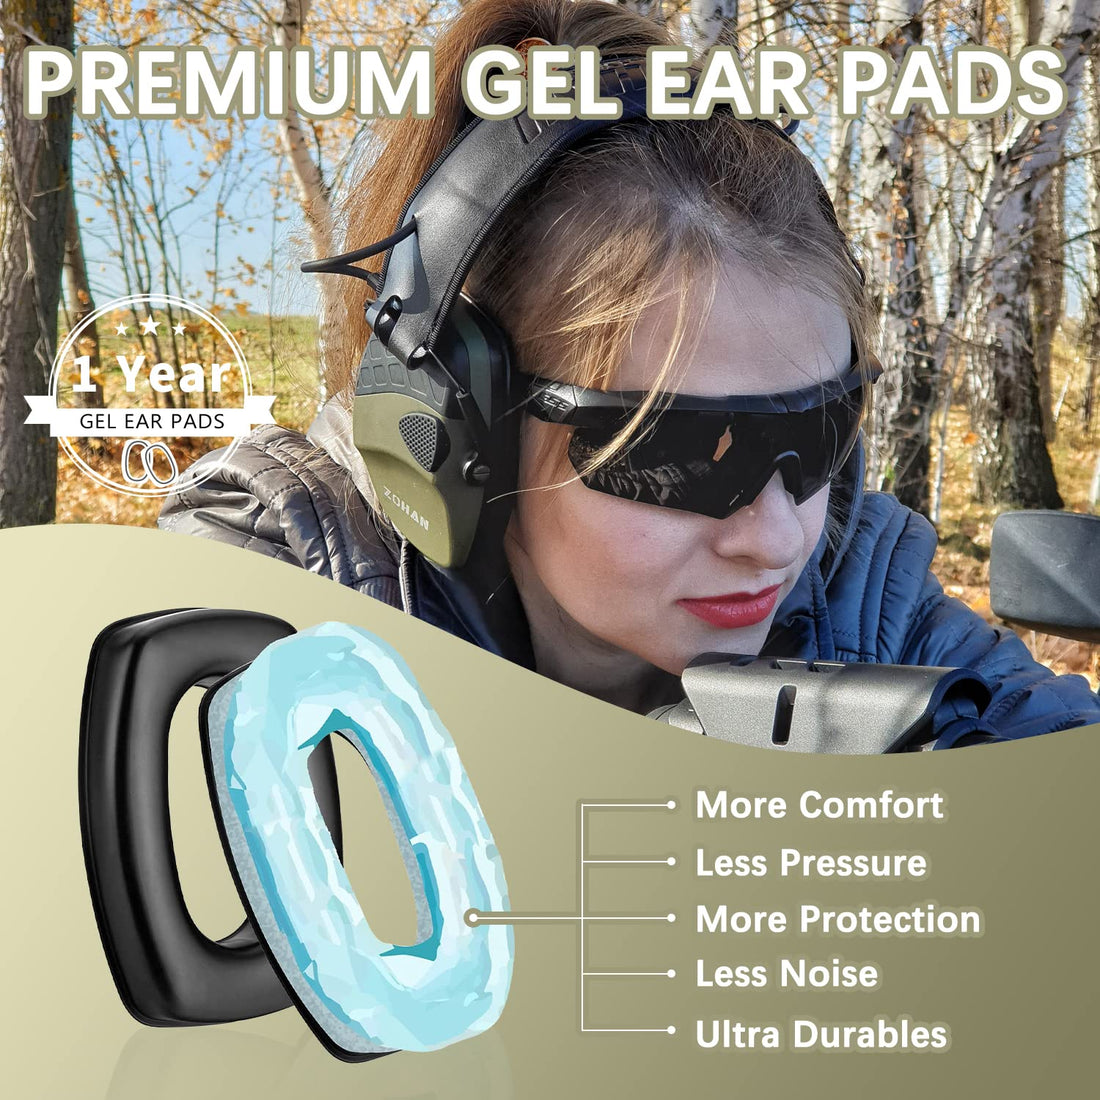 ZOHAN EM054 Electronic Shooting Ear Protection with Sound Amplification, Slim Active Noise Reduction Earmuffs for Gun Range